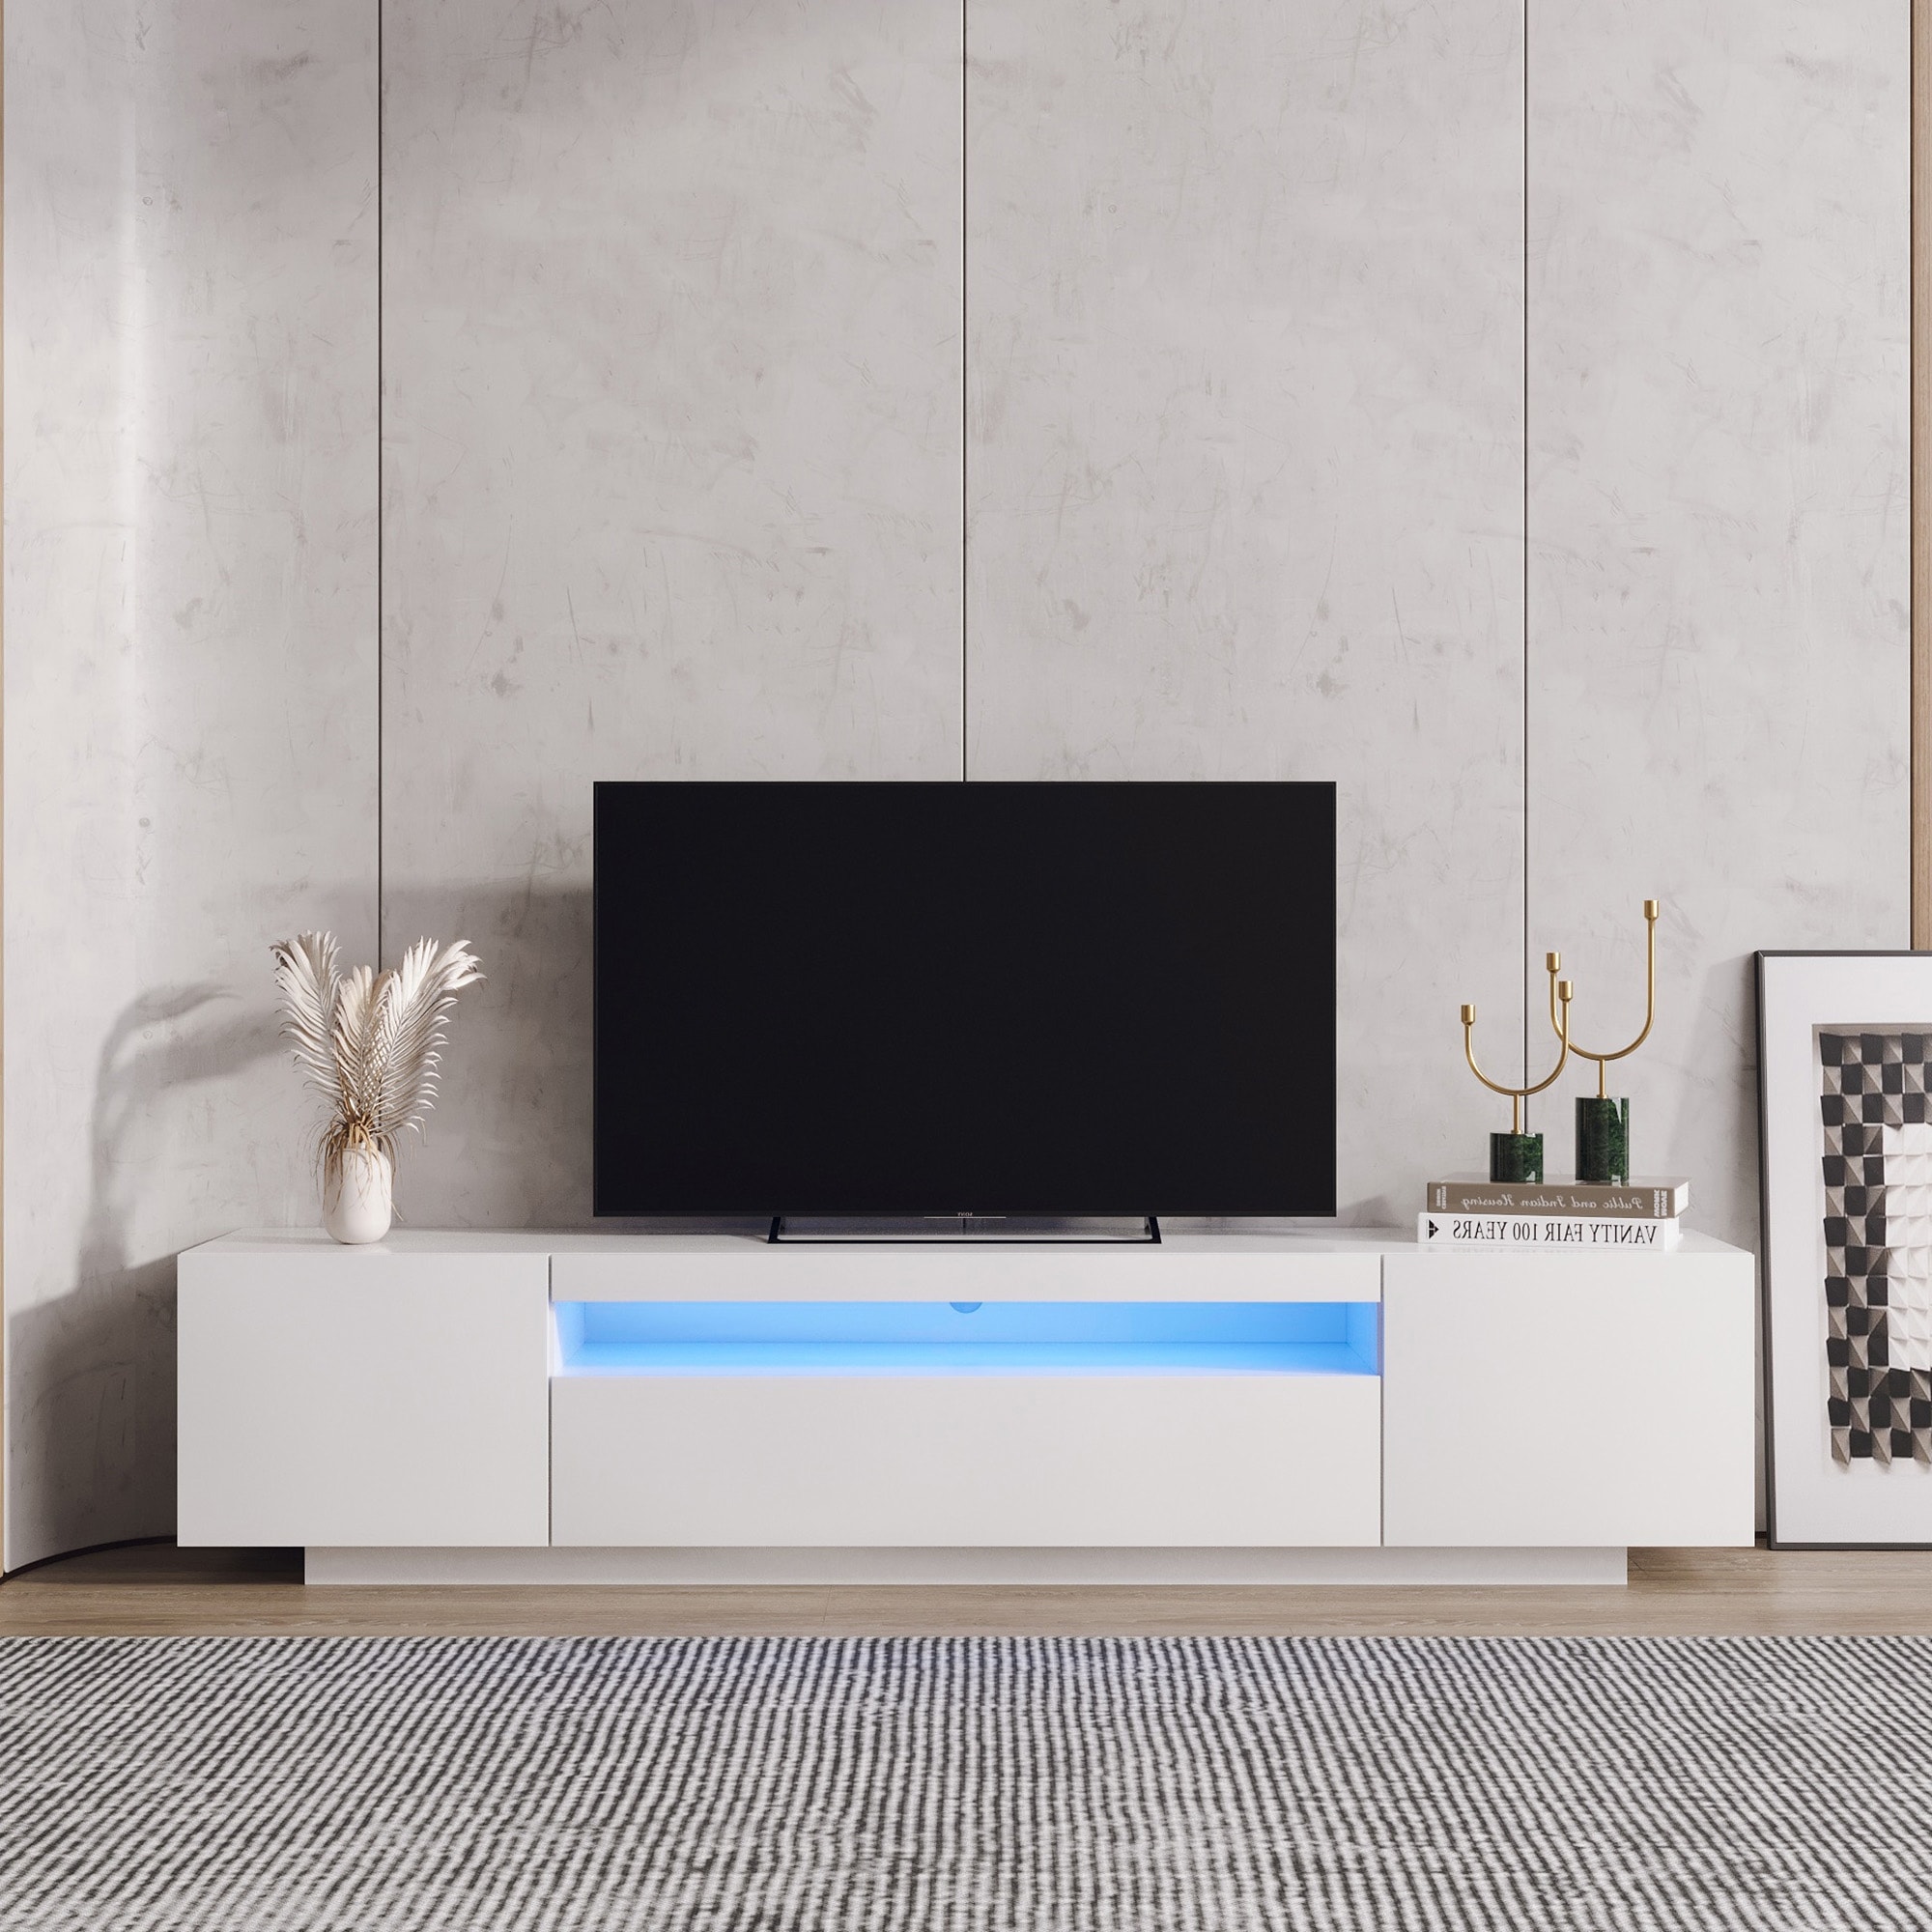 79 Tv Stand Withcolor Lamp Belt (16 Kinds Of Single Color  4 Kinds Of Color)  Modern Tv Cabinet With Storage Drawers